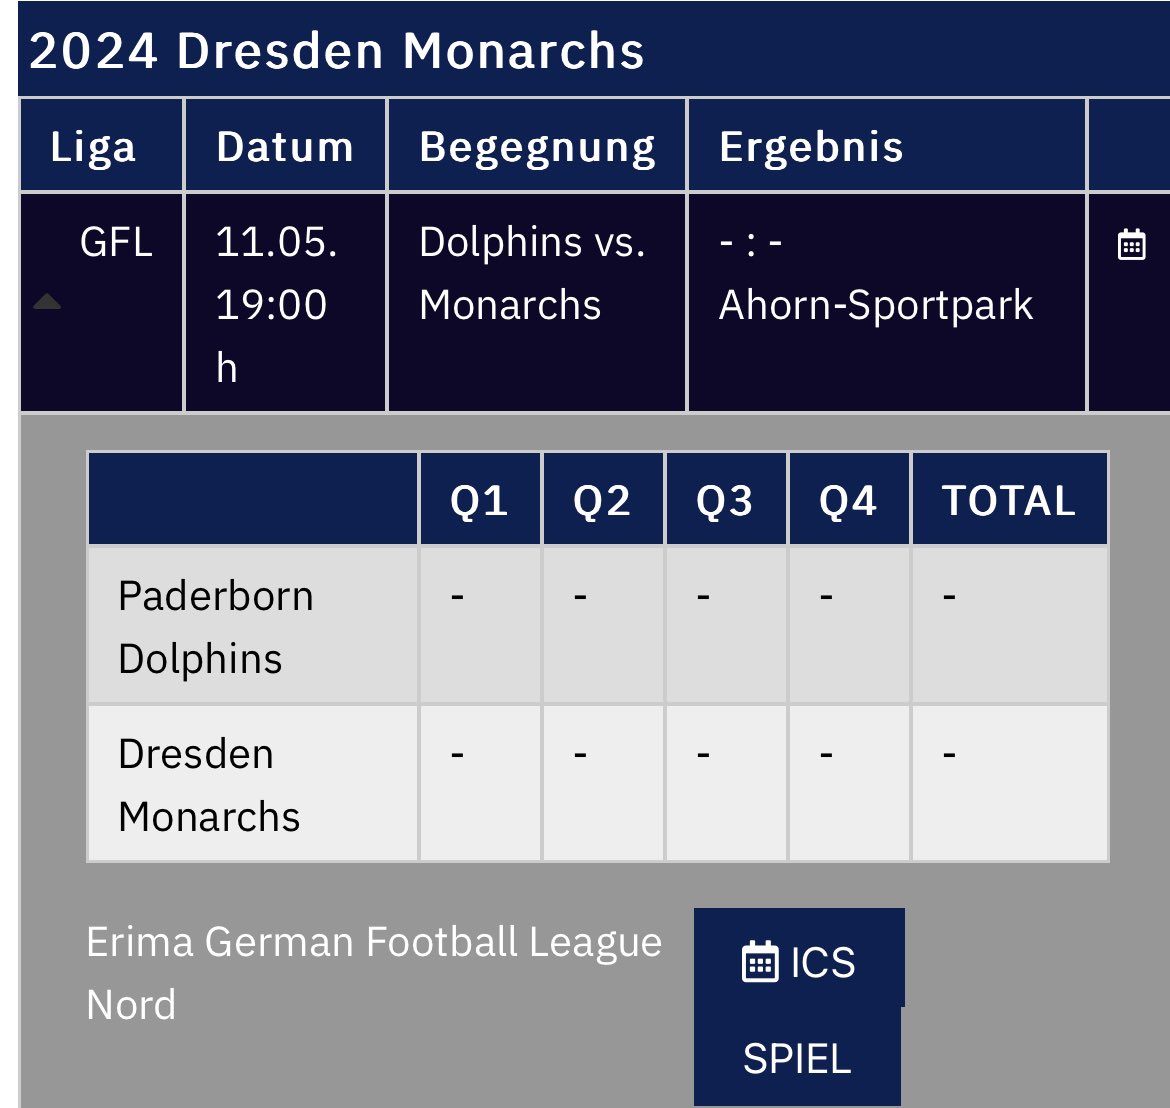 .@TheRealBadejo is set to make his @GFLinfo debut with the #DresdenMonarchs on May 11, 2024. The @TXSOTigers alum has played professionally with the @sdstrikeforce of the @IndoorFL as well. Watch all games here: sportdeutschland.tv/gfl @LightOnSports @FCSNationRadio1